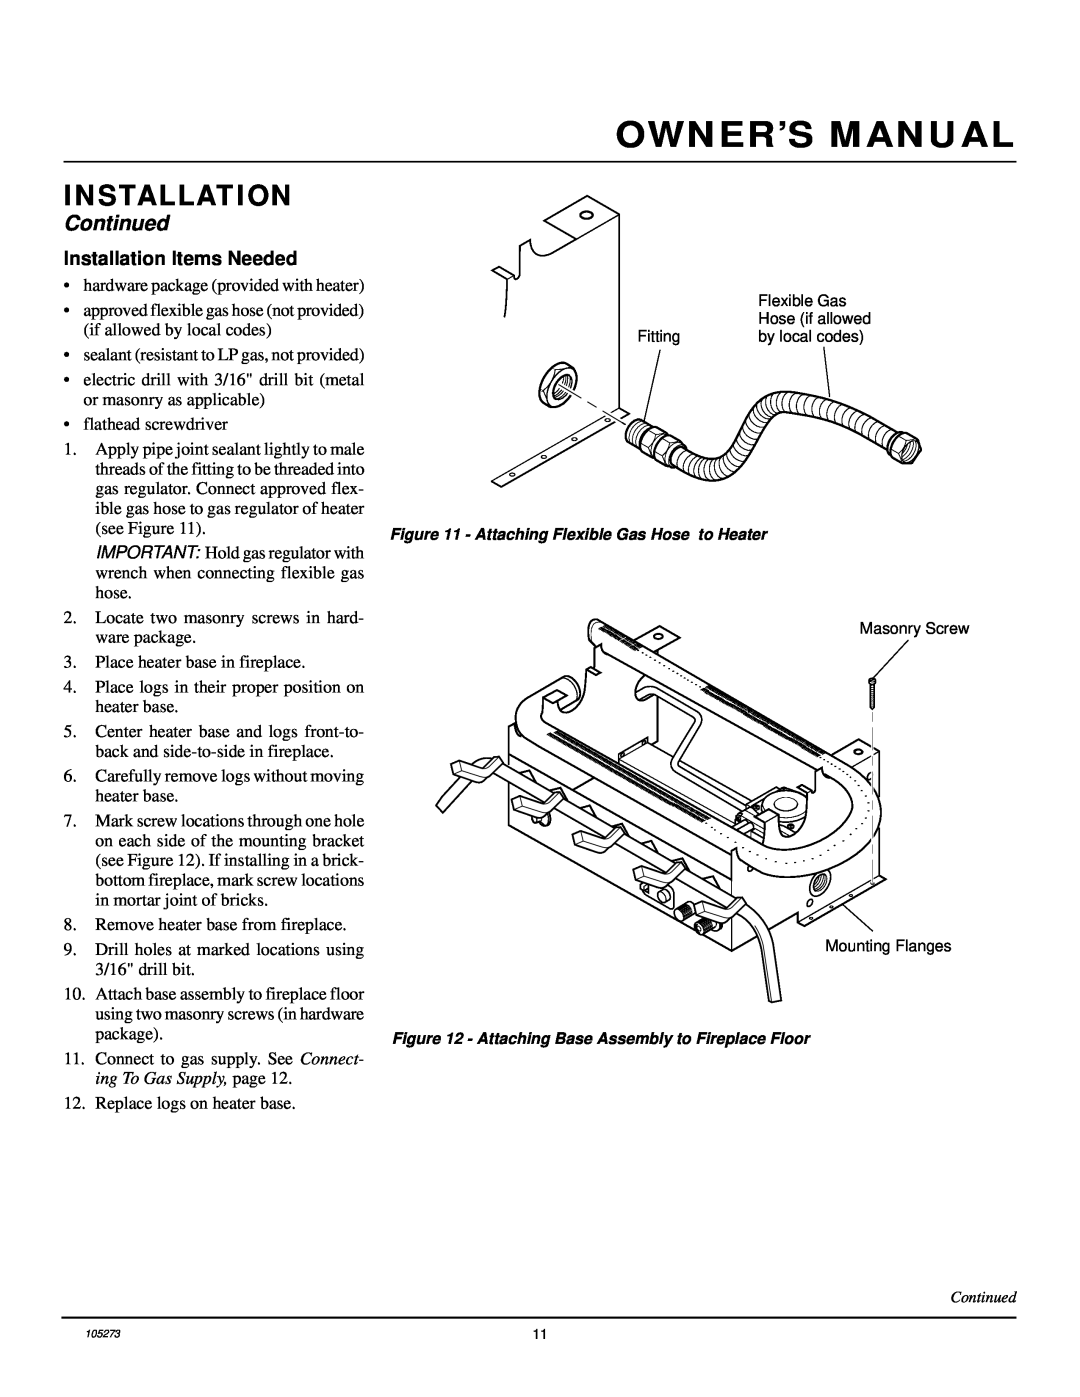 Vanguard Heating UNVENTED (VENT-FREE) NATURAL GAS LOG HEATER installation manual Continued, Installation Items Needed 